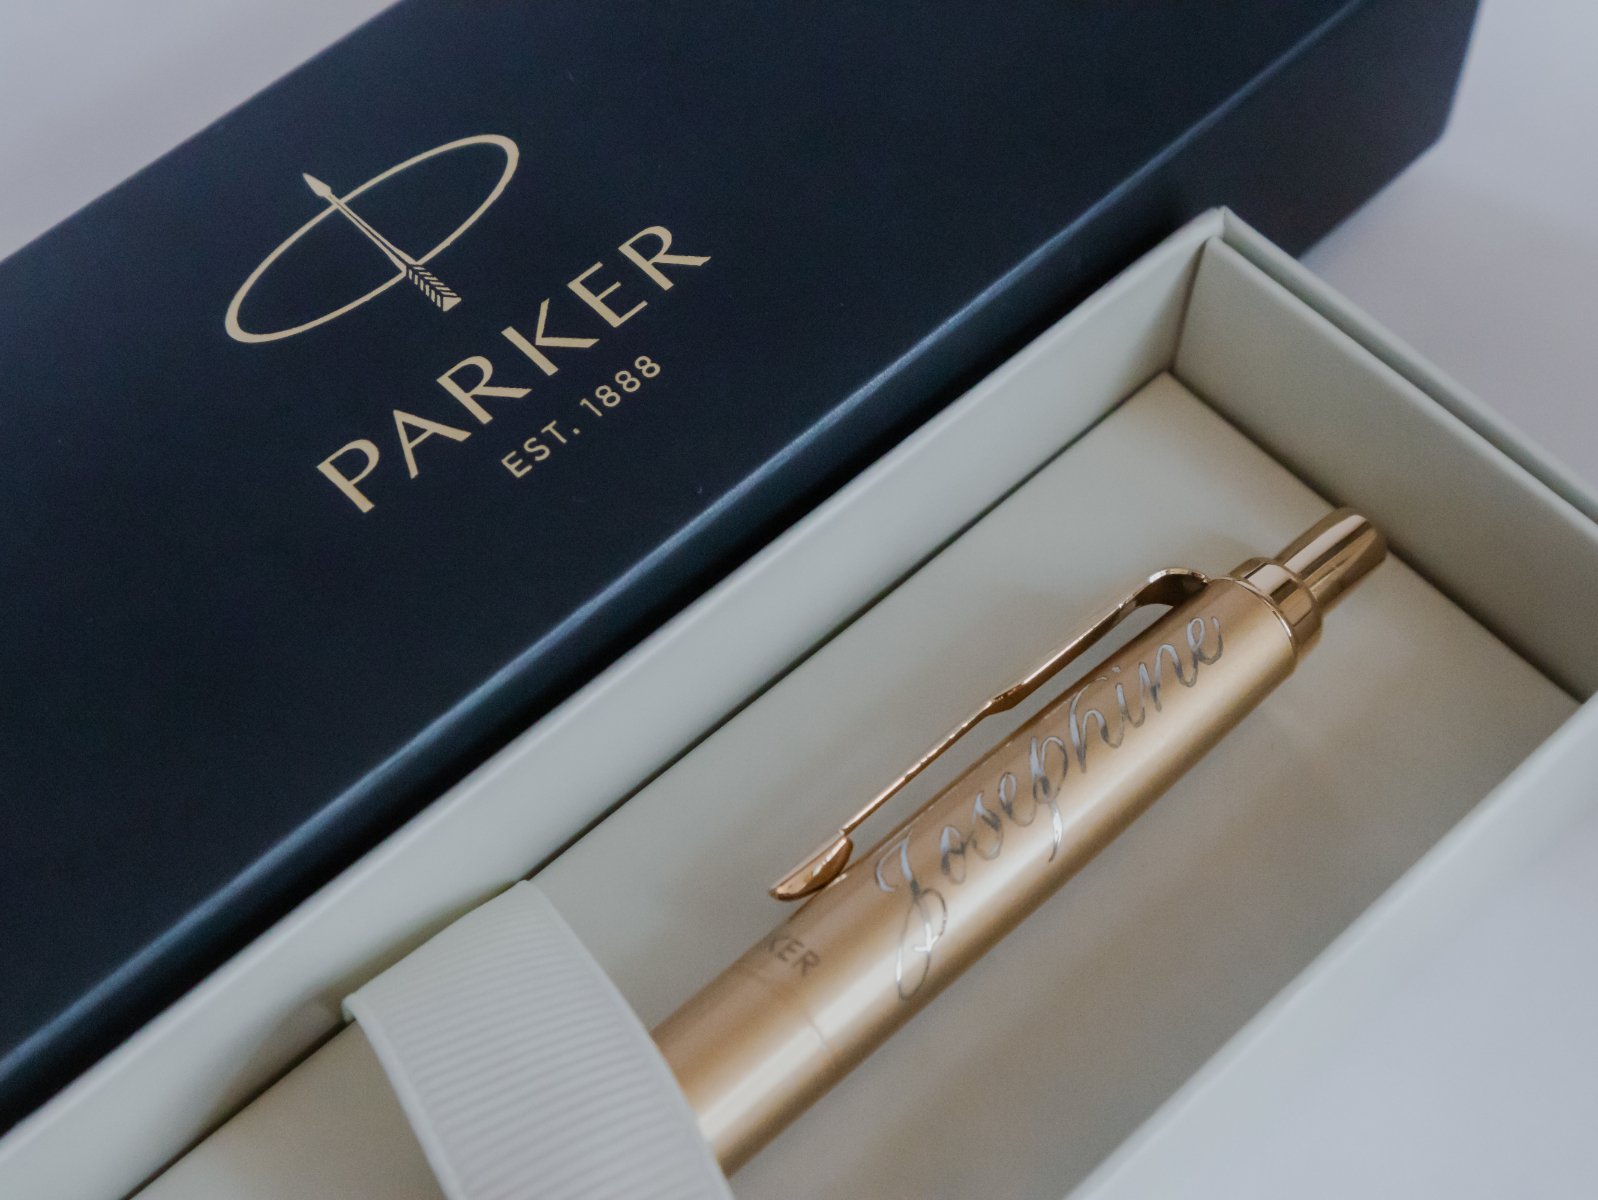 First Name Calligraphy Engraving on Parker Pens for Bloomberg 11.jpg